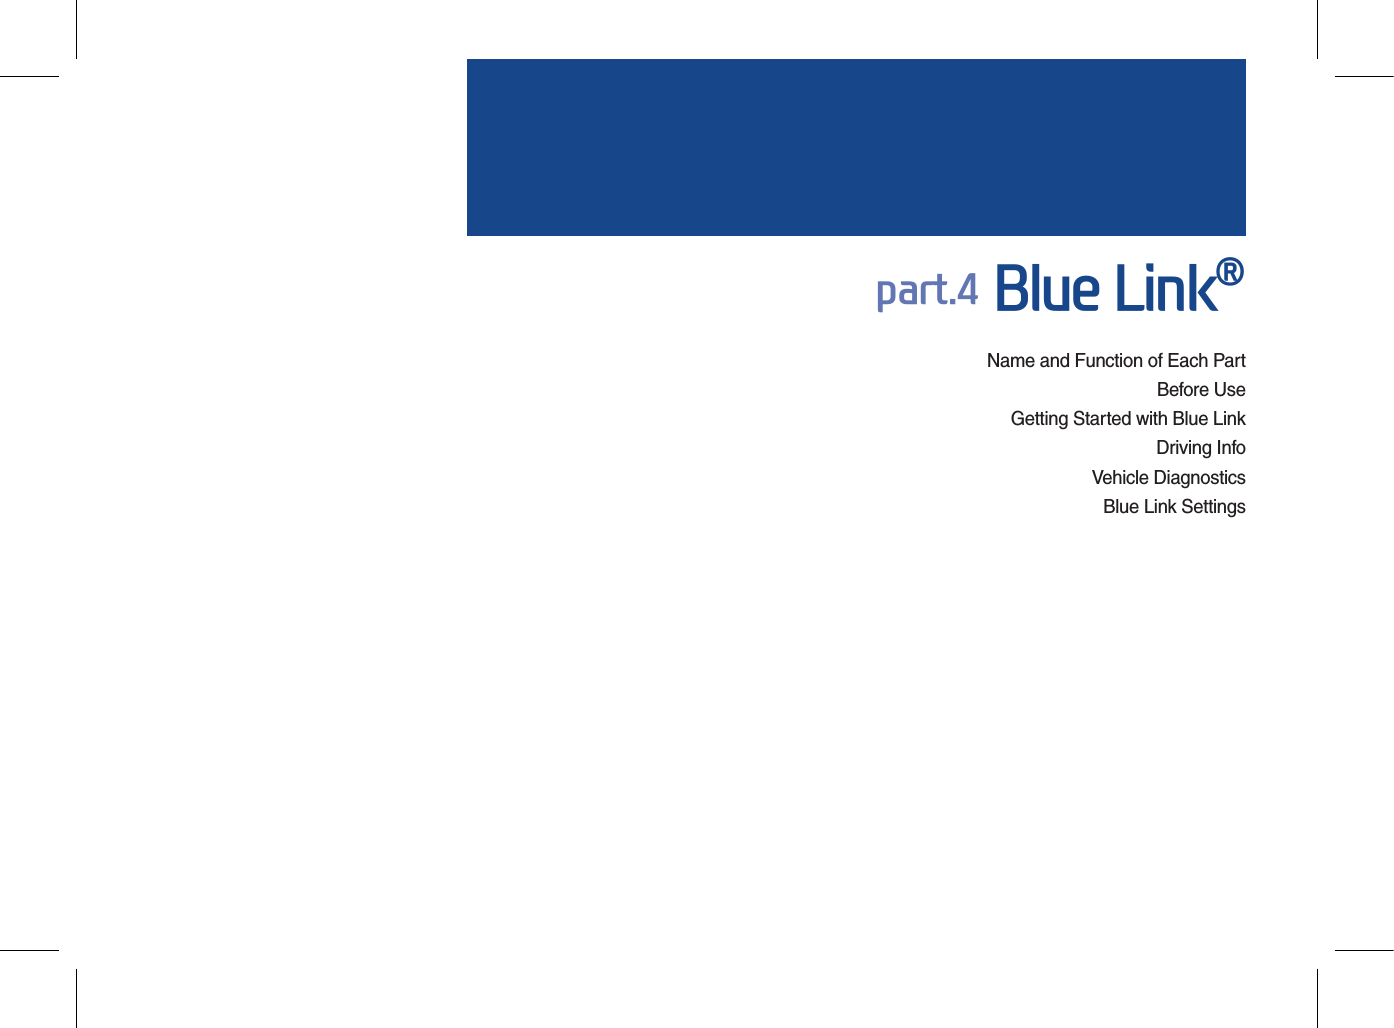 Name and Function of Each PartBefore UseGetting Started with Blue LinkDriving InfoVehicle DiagnosticsBlue Link Settingspart.4 Blue Link®